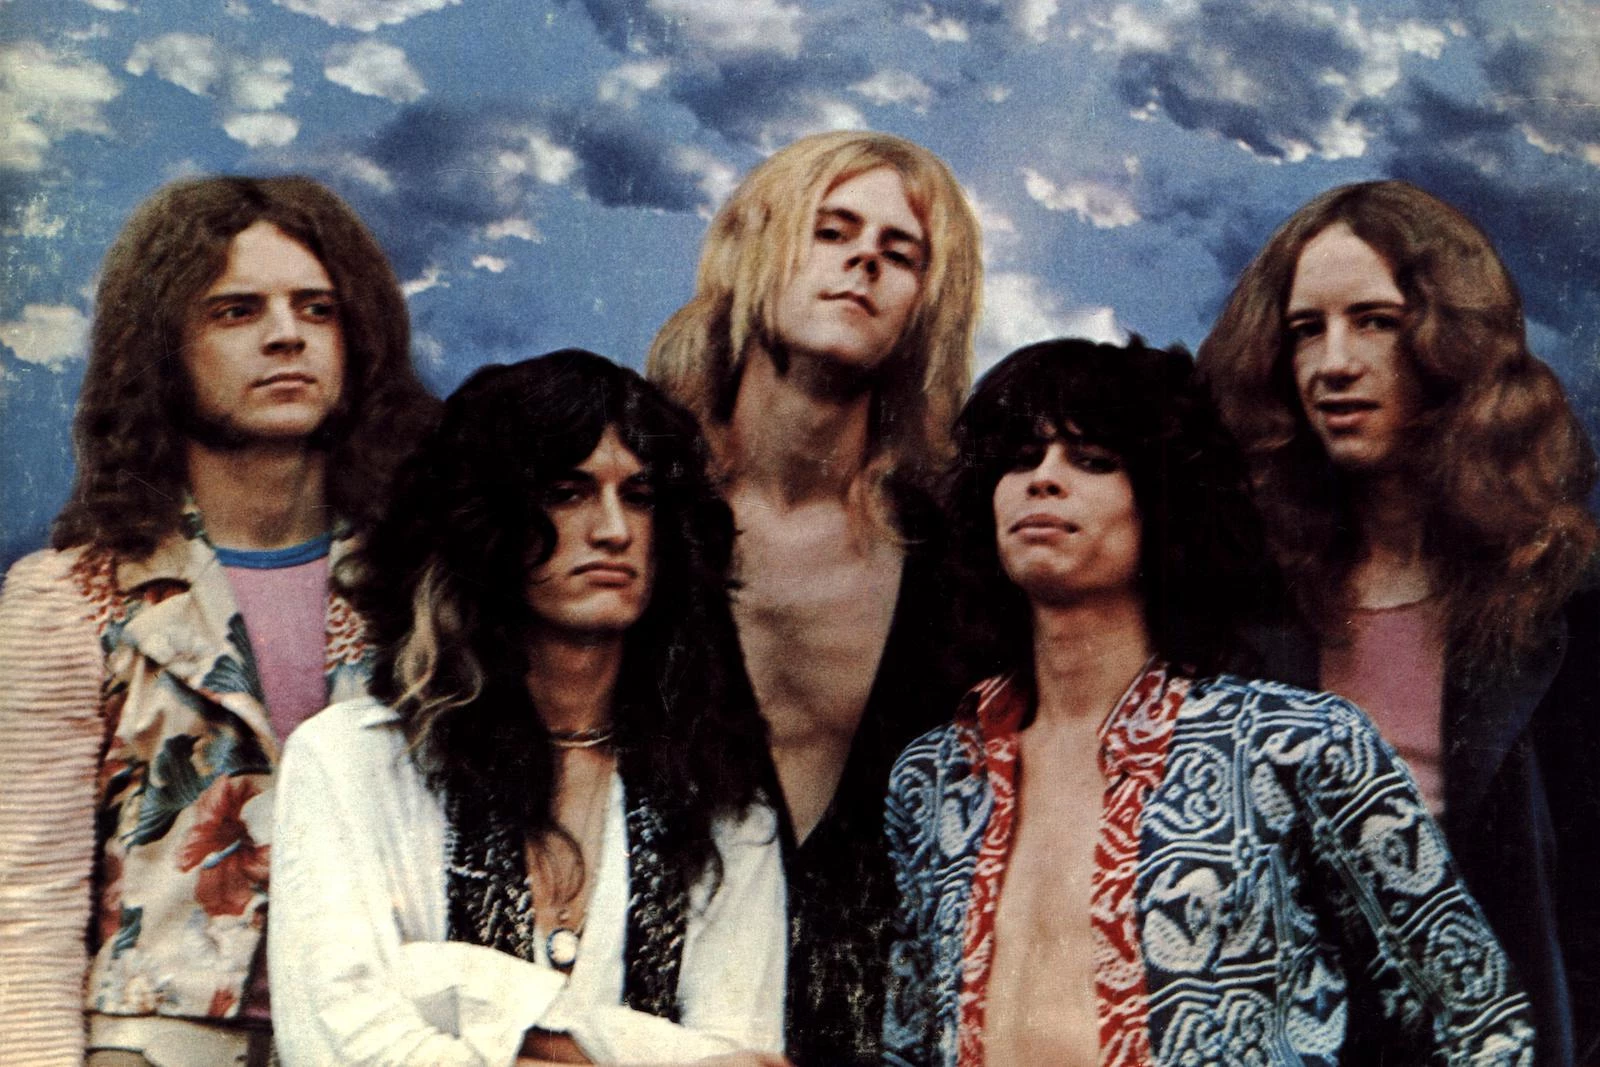 When Aerosmith’s Self-Titled Debut Arrived With a Whimper